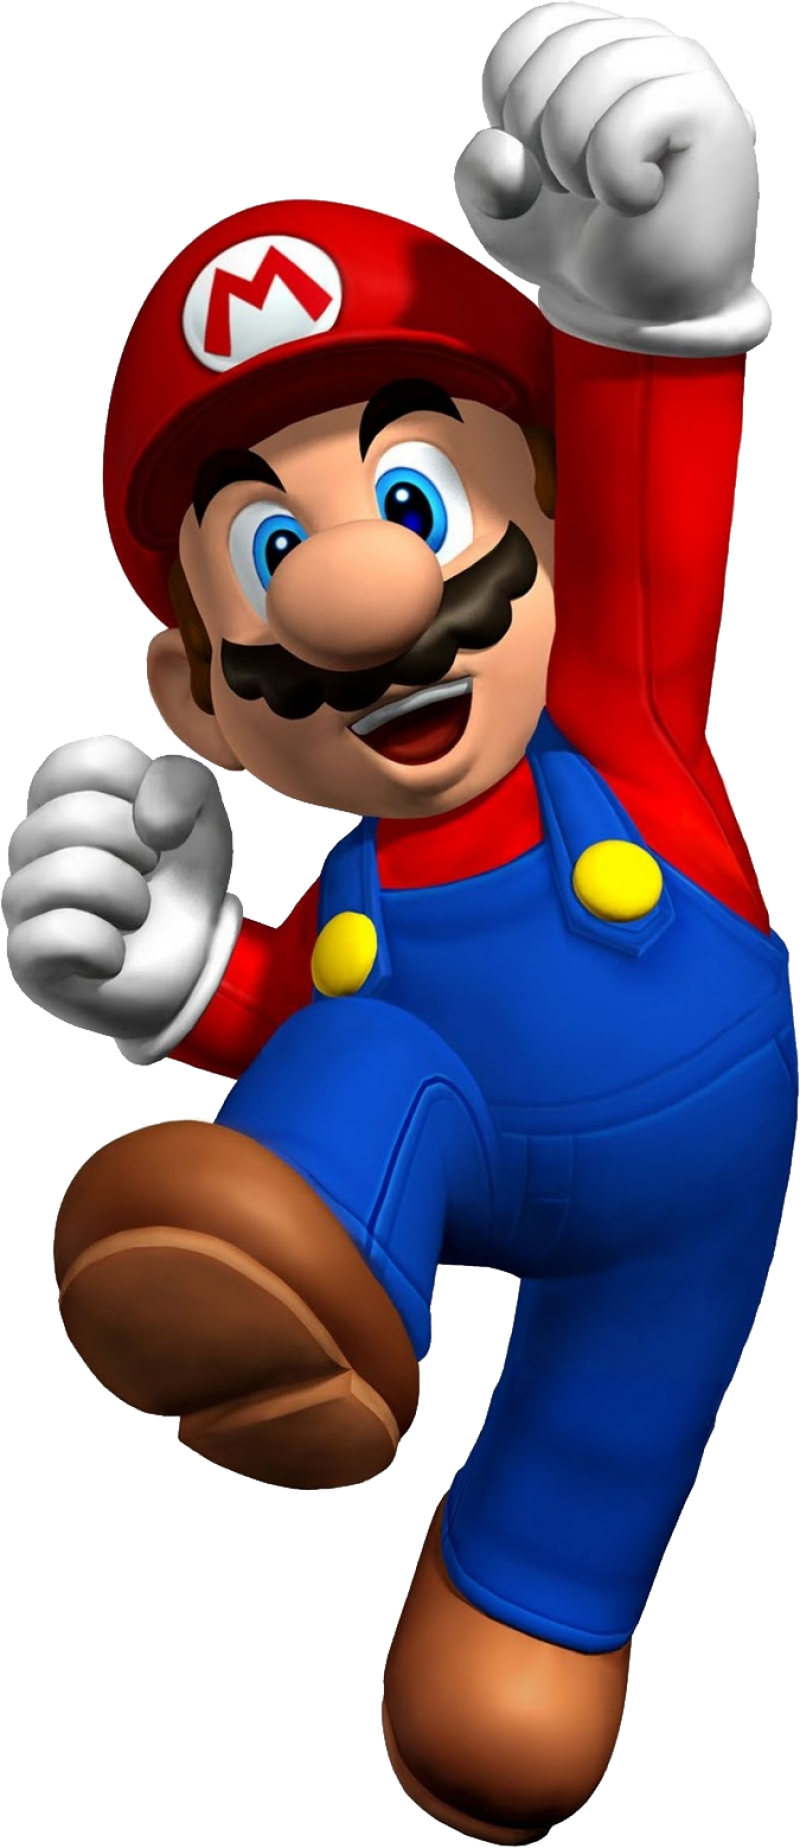 0 Result Images of Super Mario Bros Characters Png - PNG Image Collection